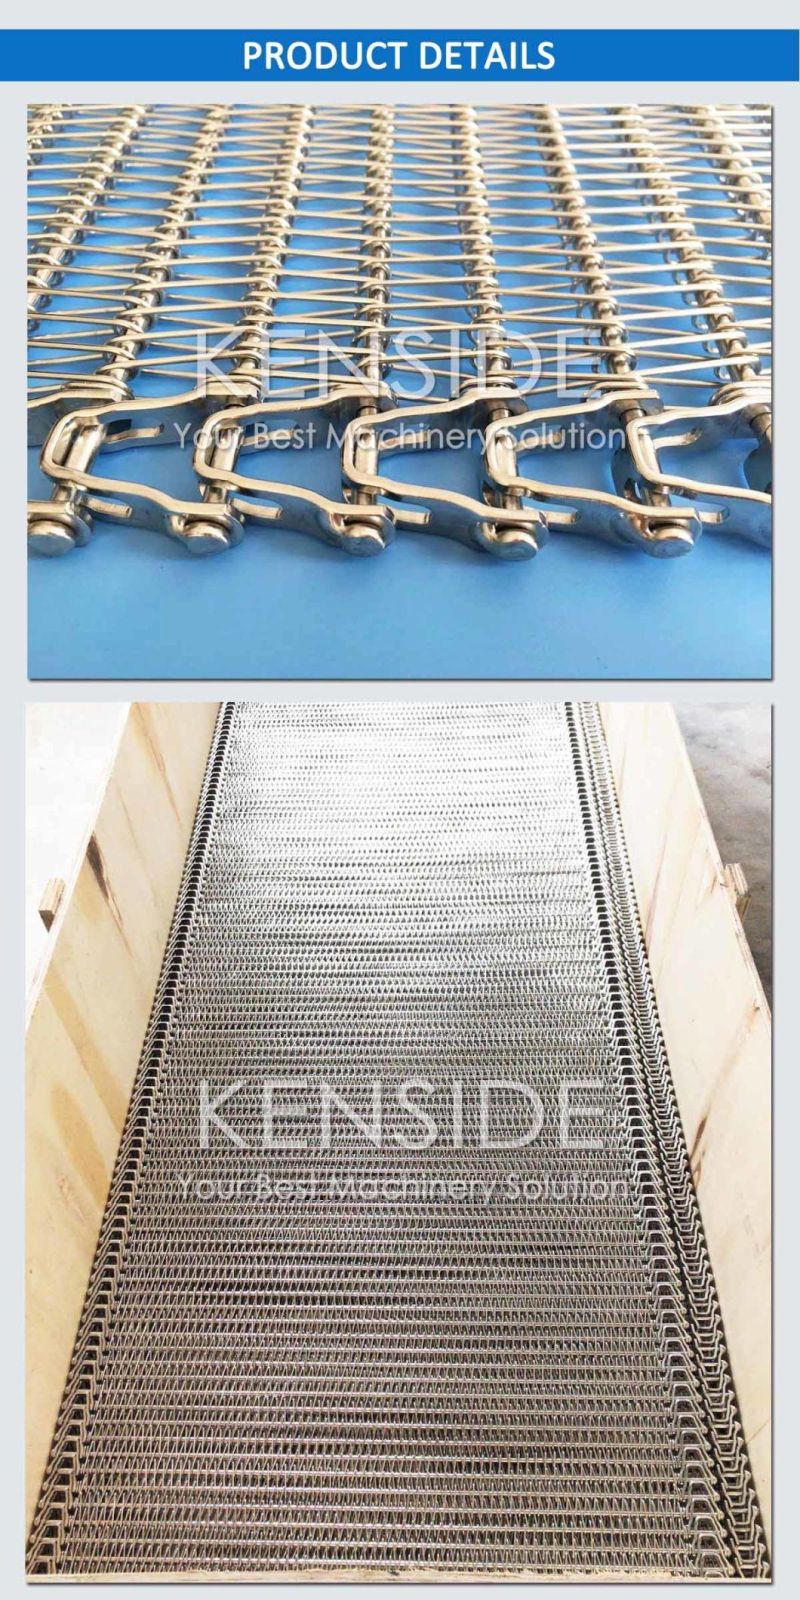 Stainless Steel Belting Spiral Conveyor Belts Reduced Radius Belts for Cooling Conveyors